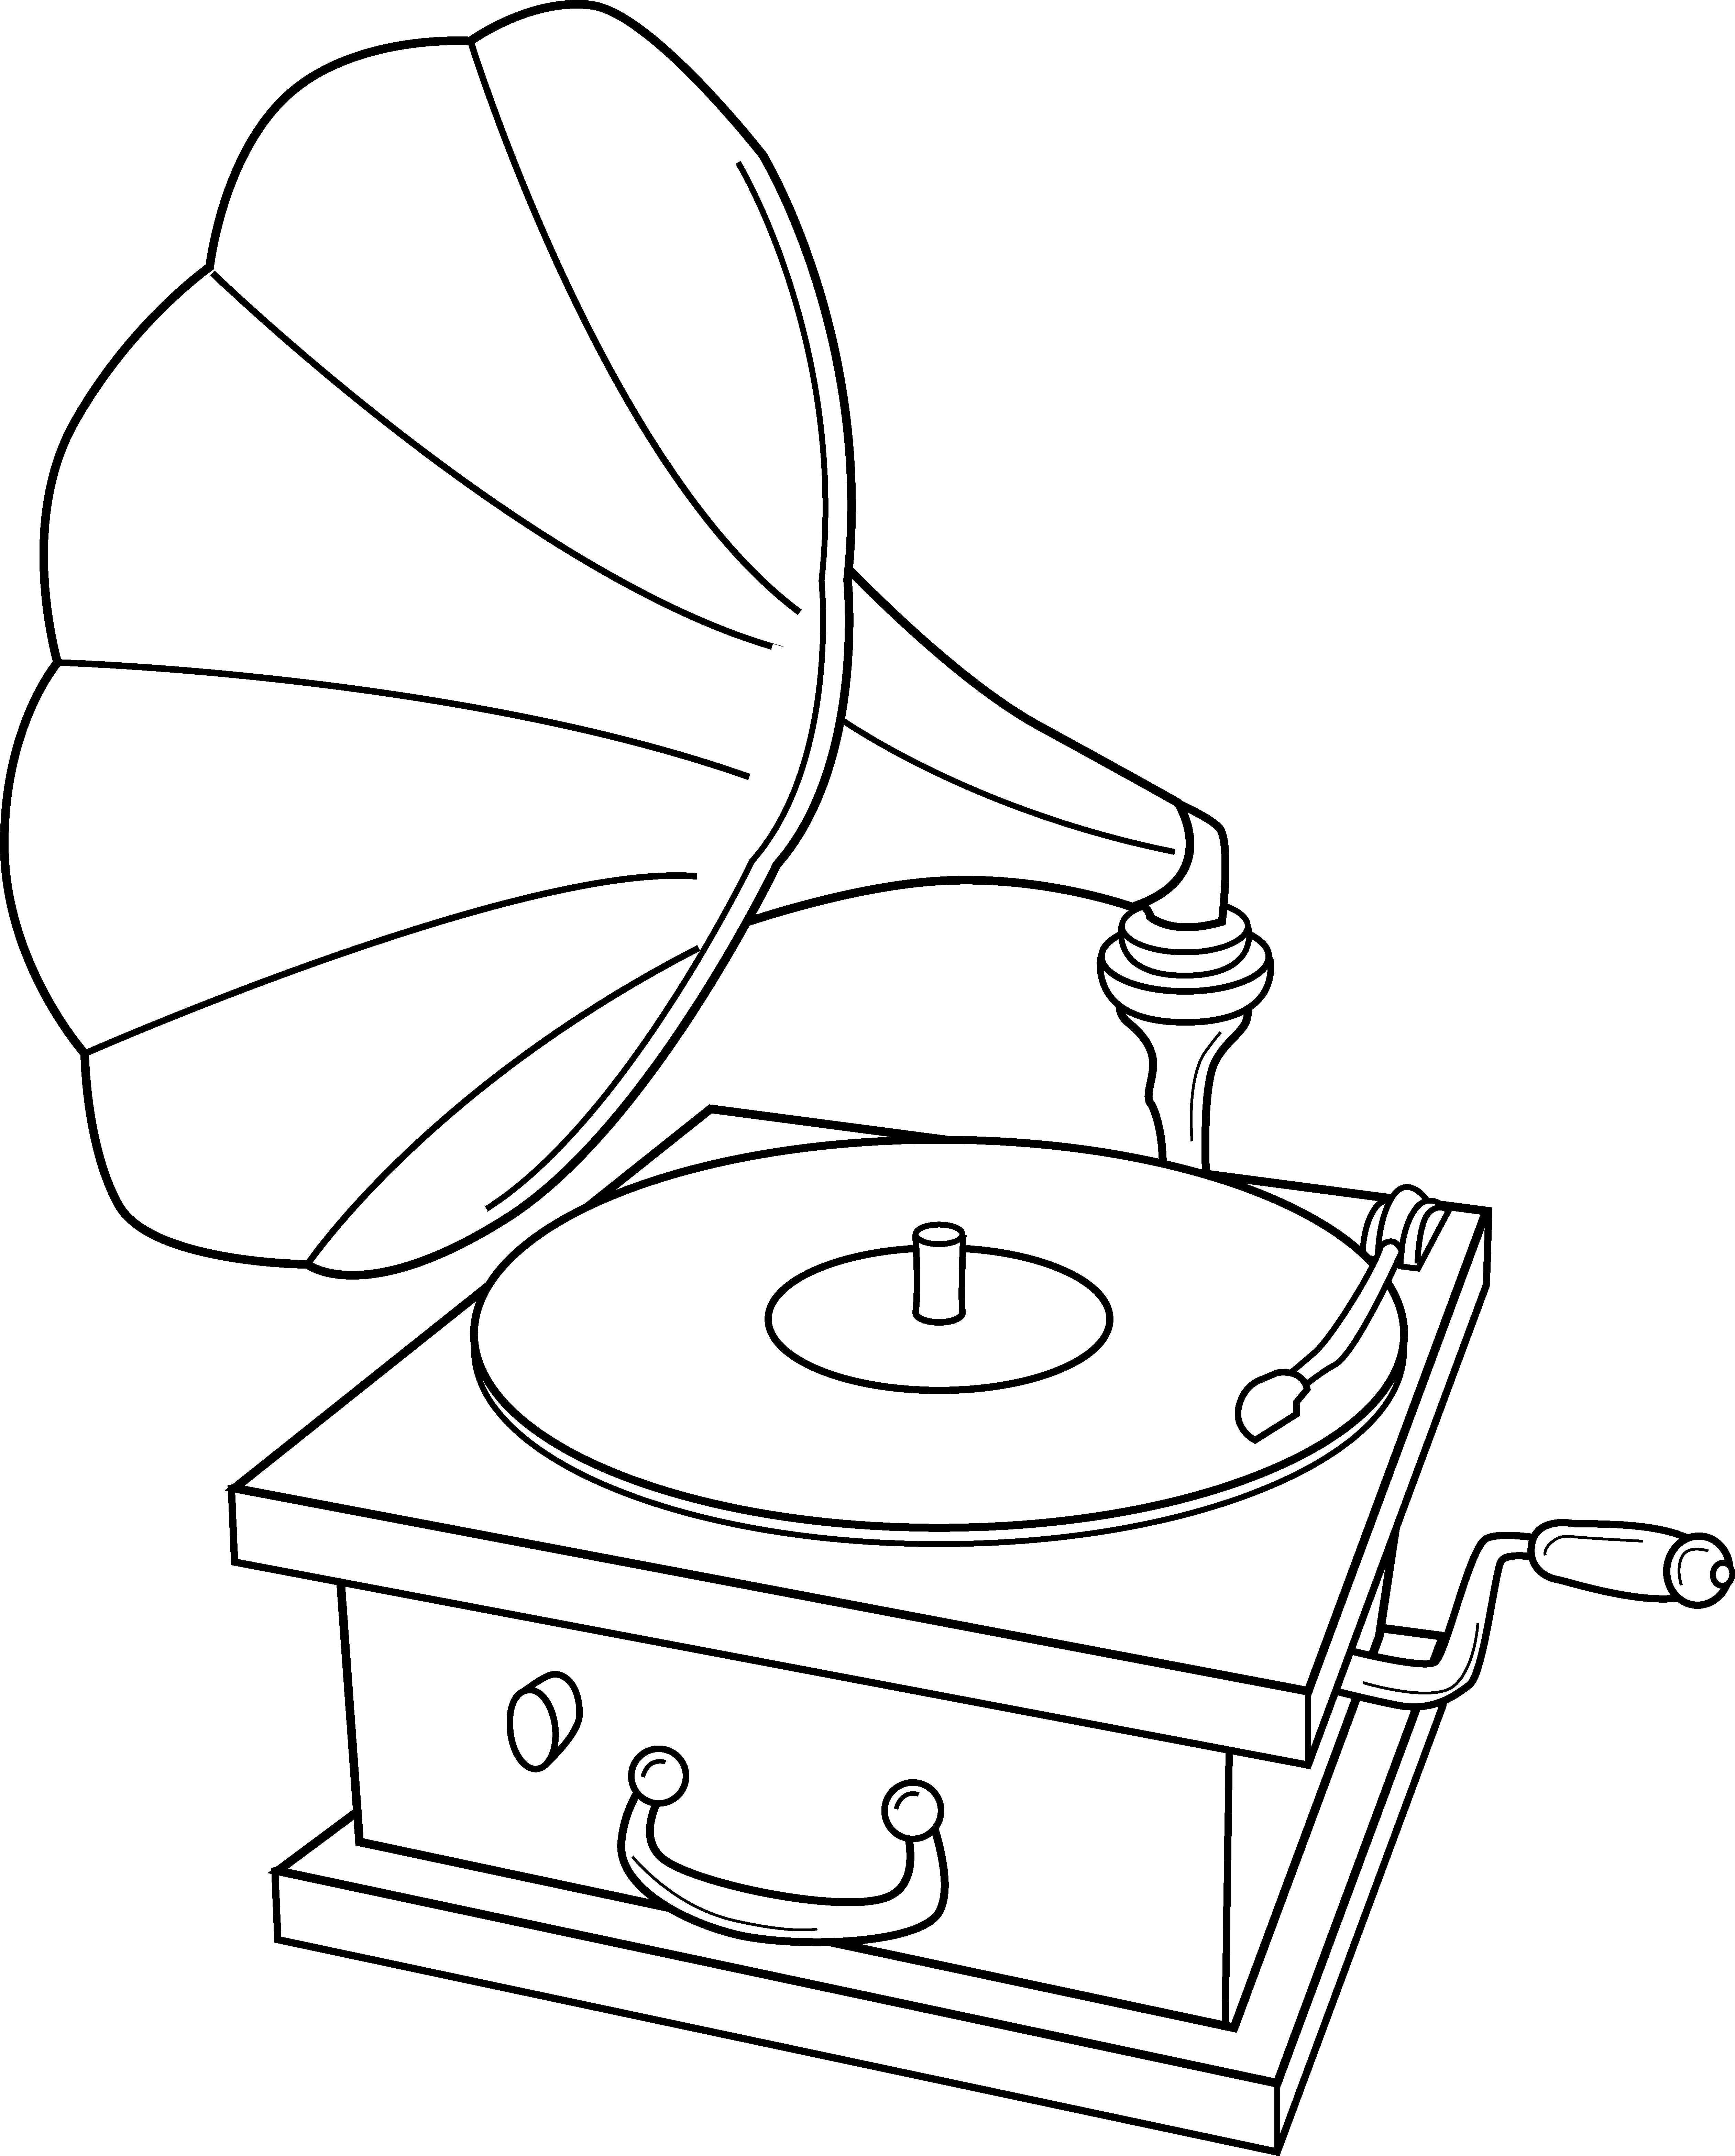 Old record player drawing. Scientist clipart recording